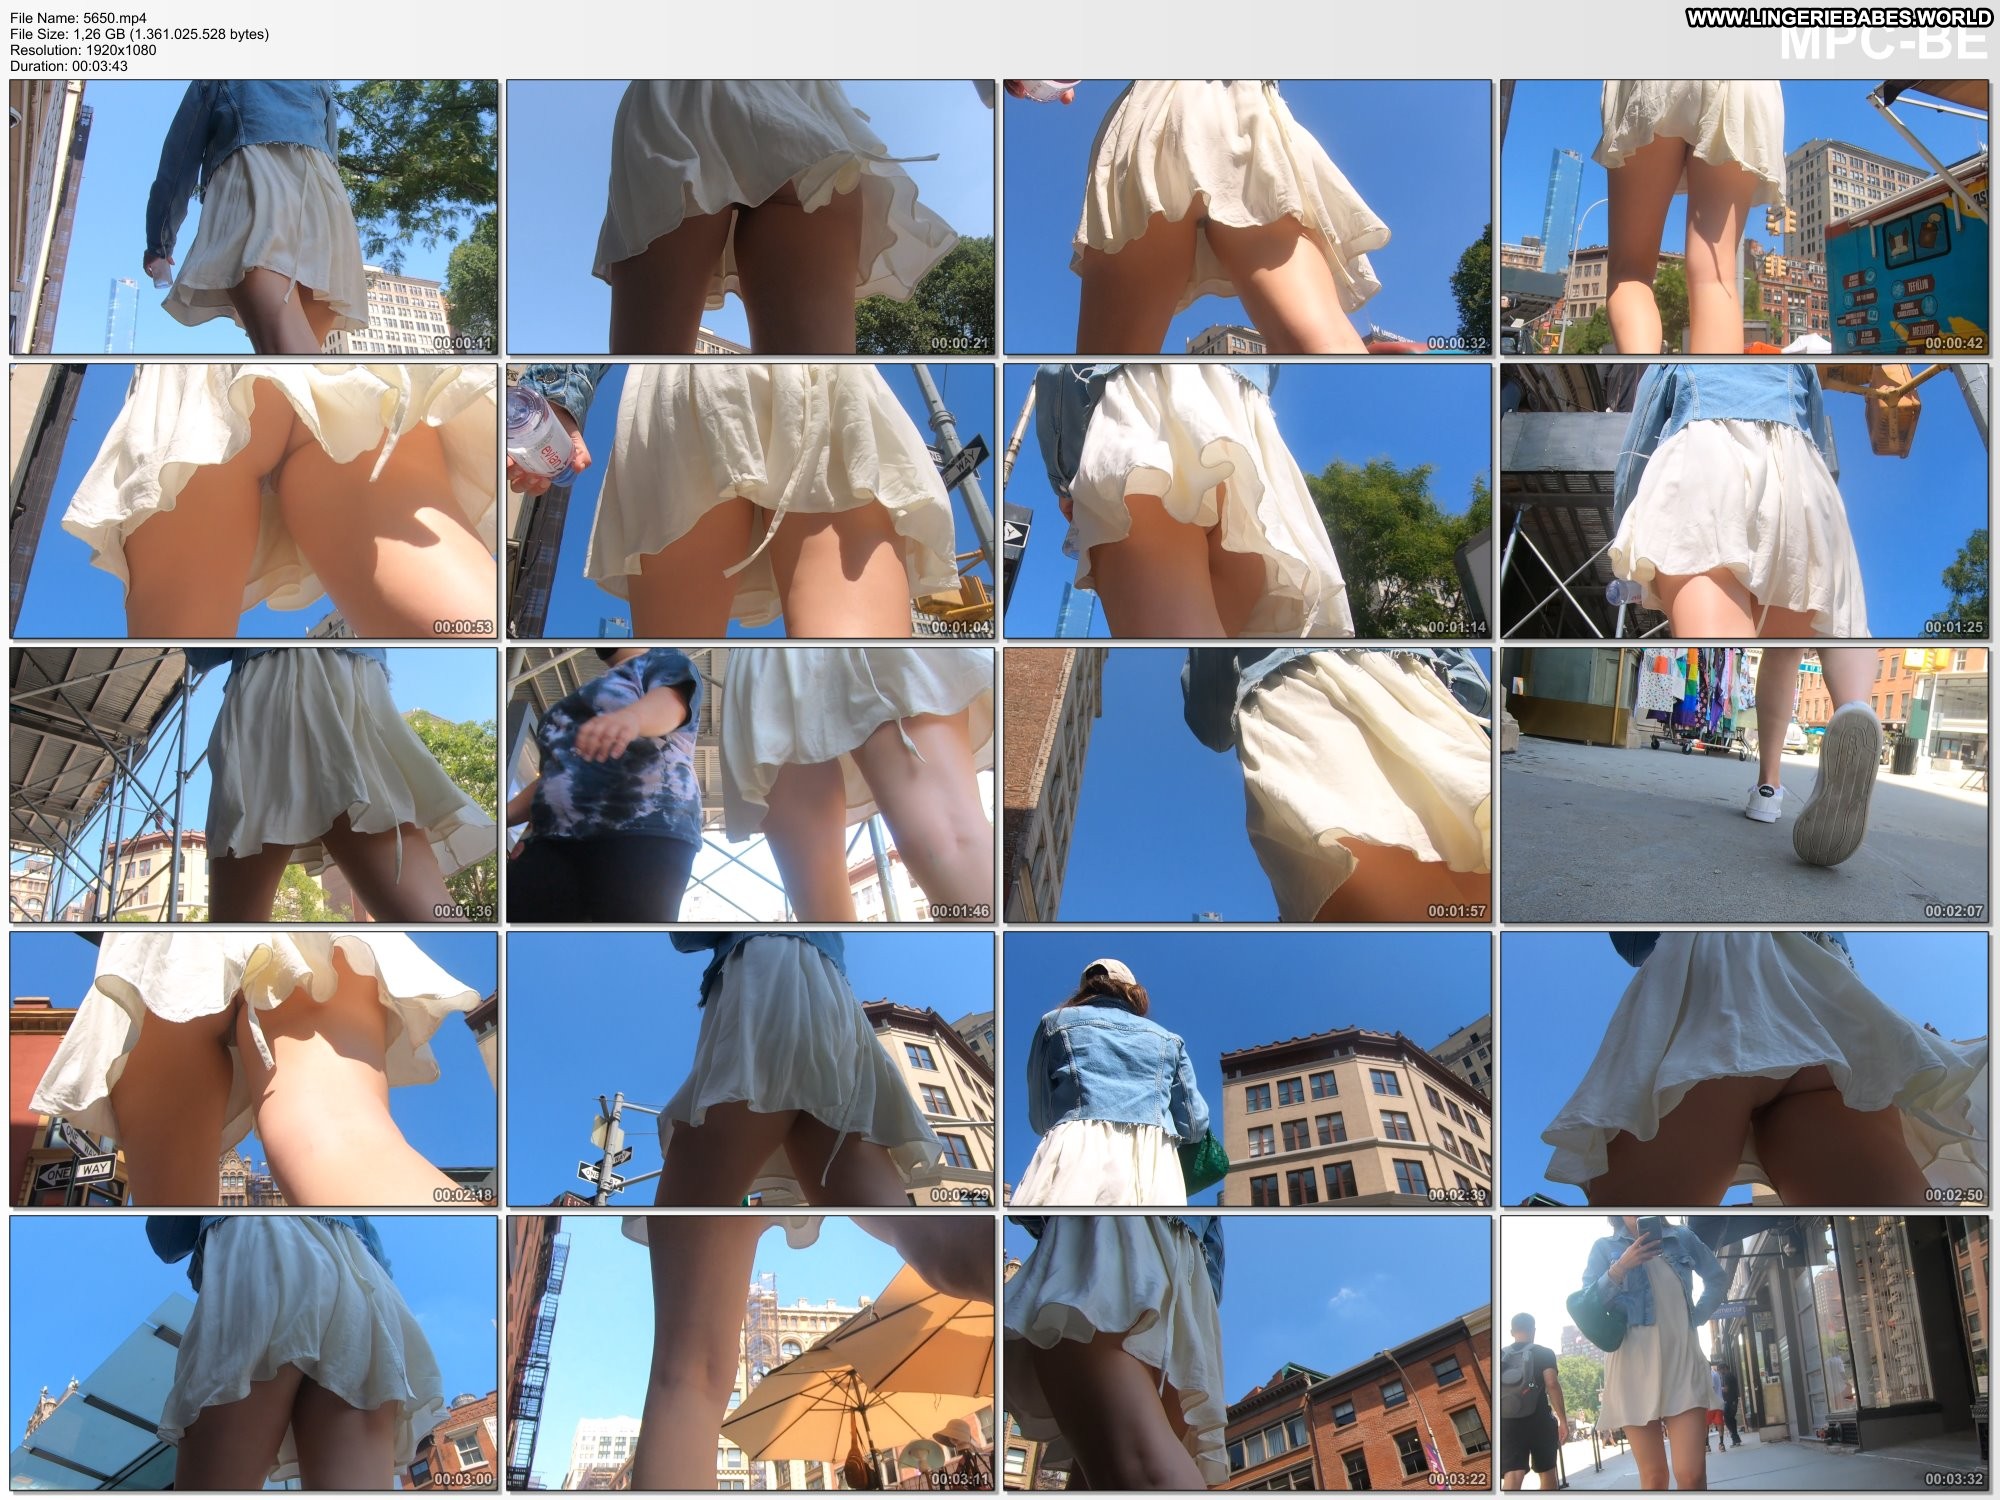 Girlfriend Upskirt Thong - Porn upskirt street Picture Archives - Complete Porn Database Pictures